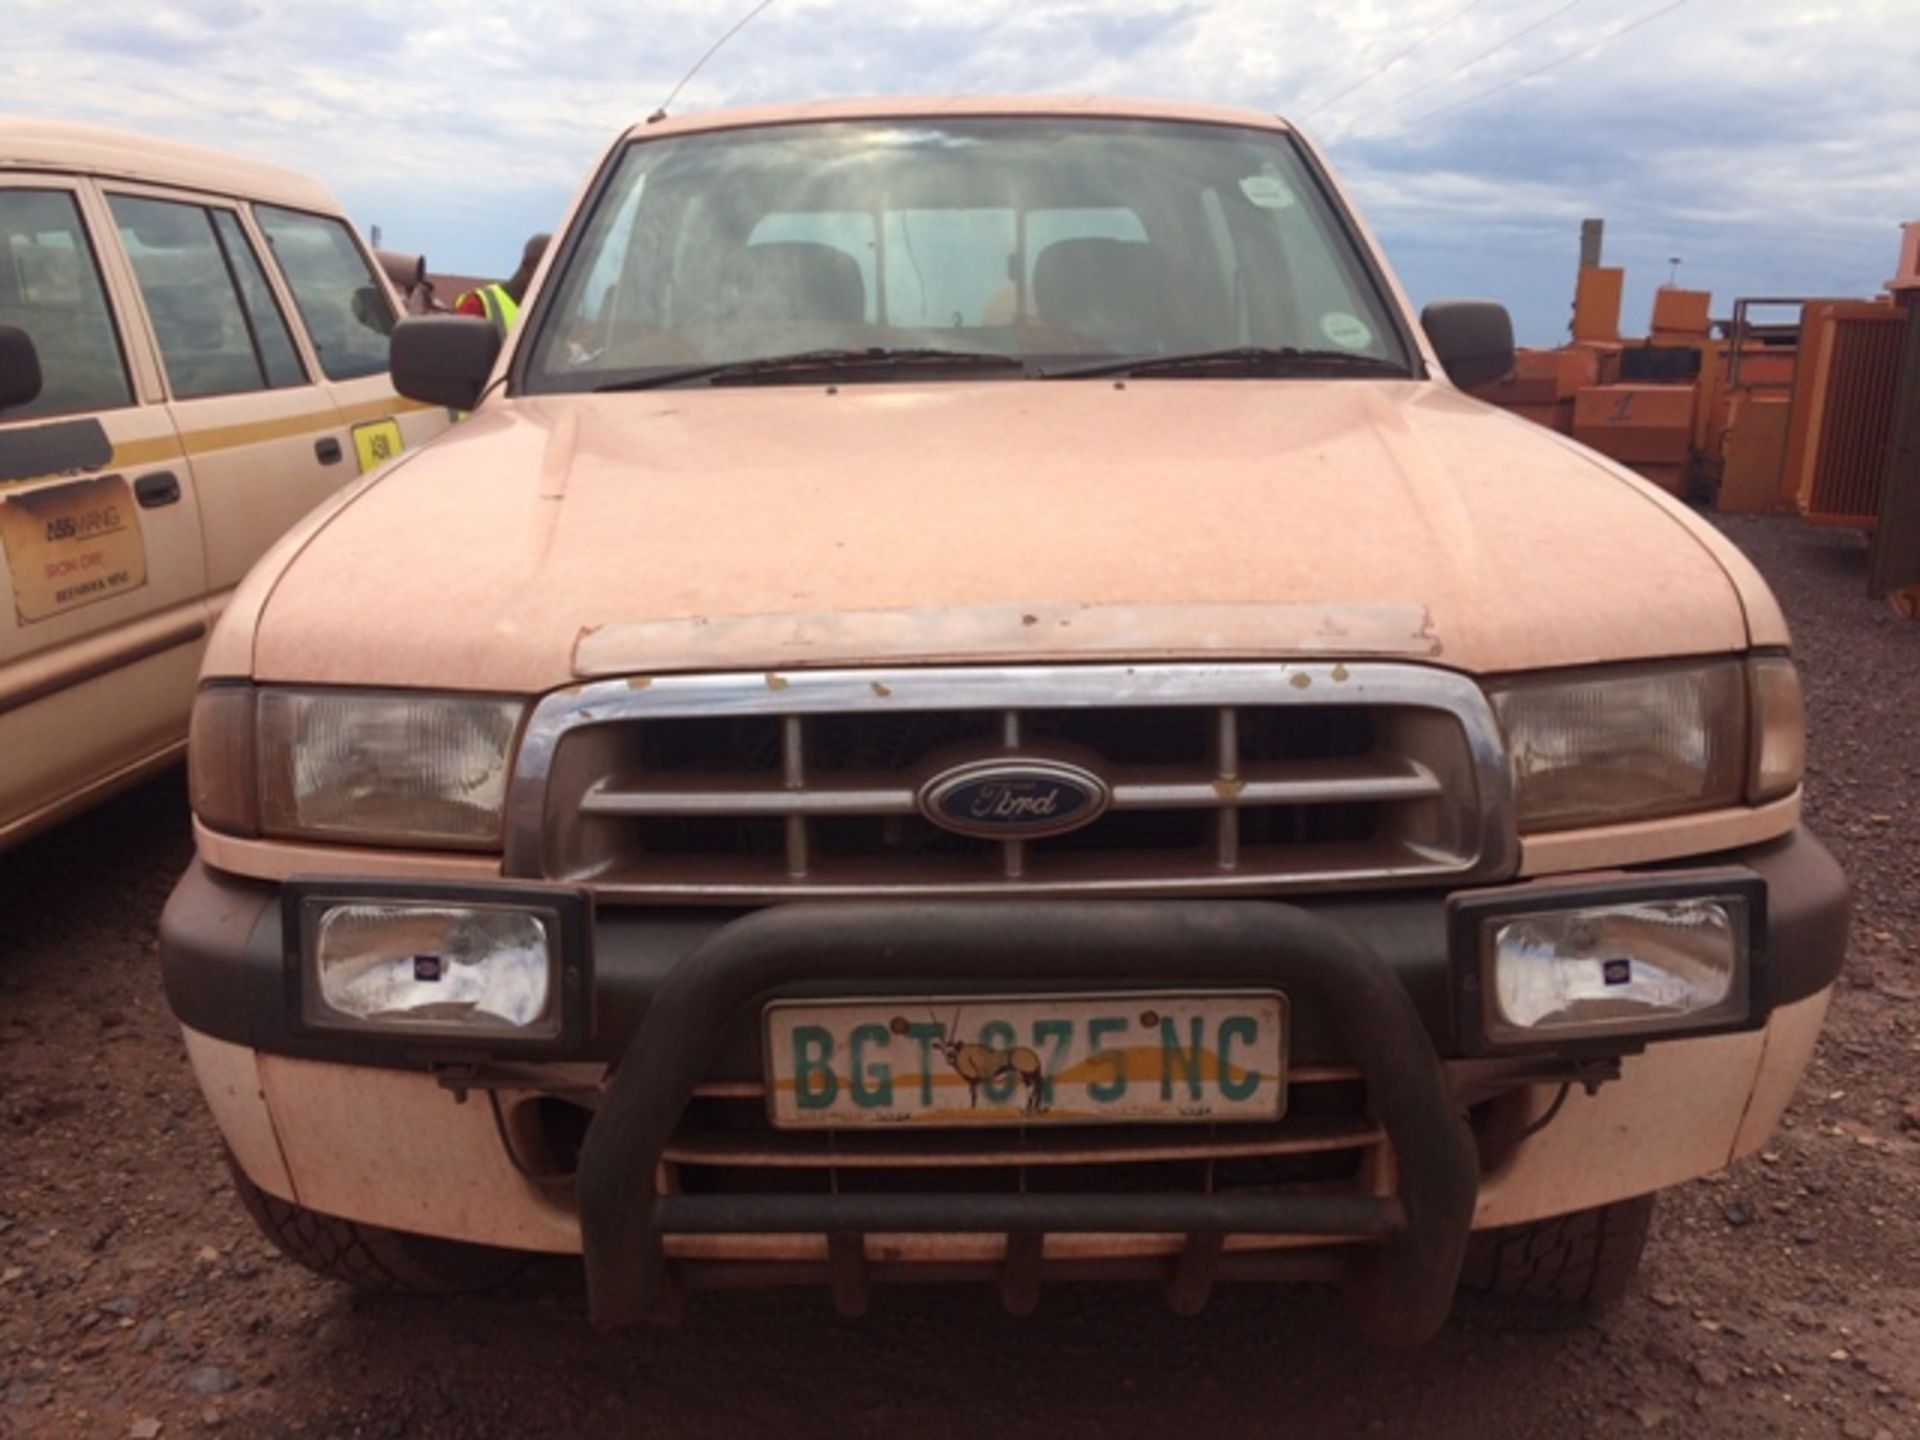 2000FORD RANGER2500TDXLT HITRAIL148912KM(DEREG.NO DOC FEE(BEESHOEK)STICKERS T/B REMOVED BEF.DISPATCH - Image 2 of 15